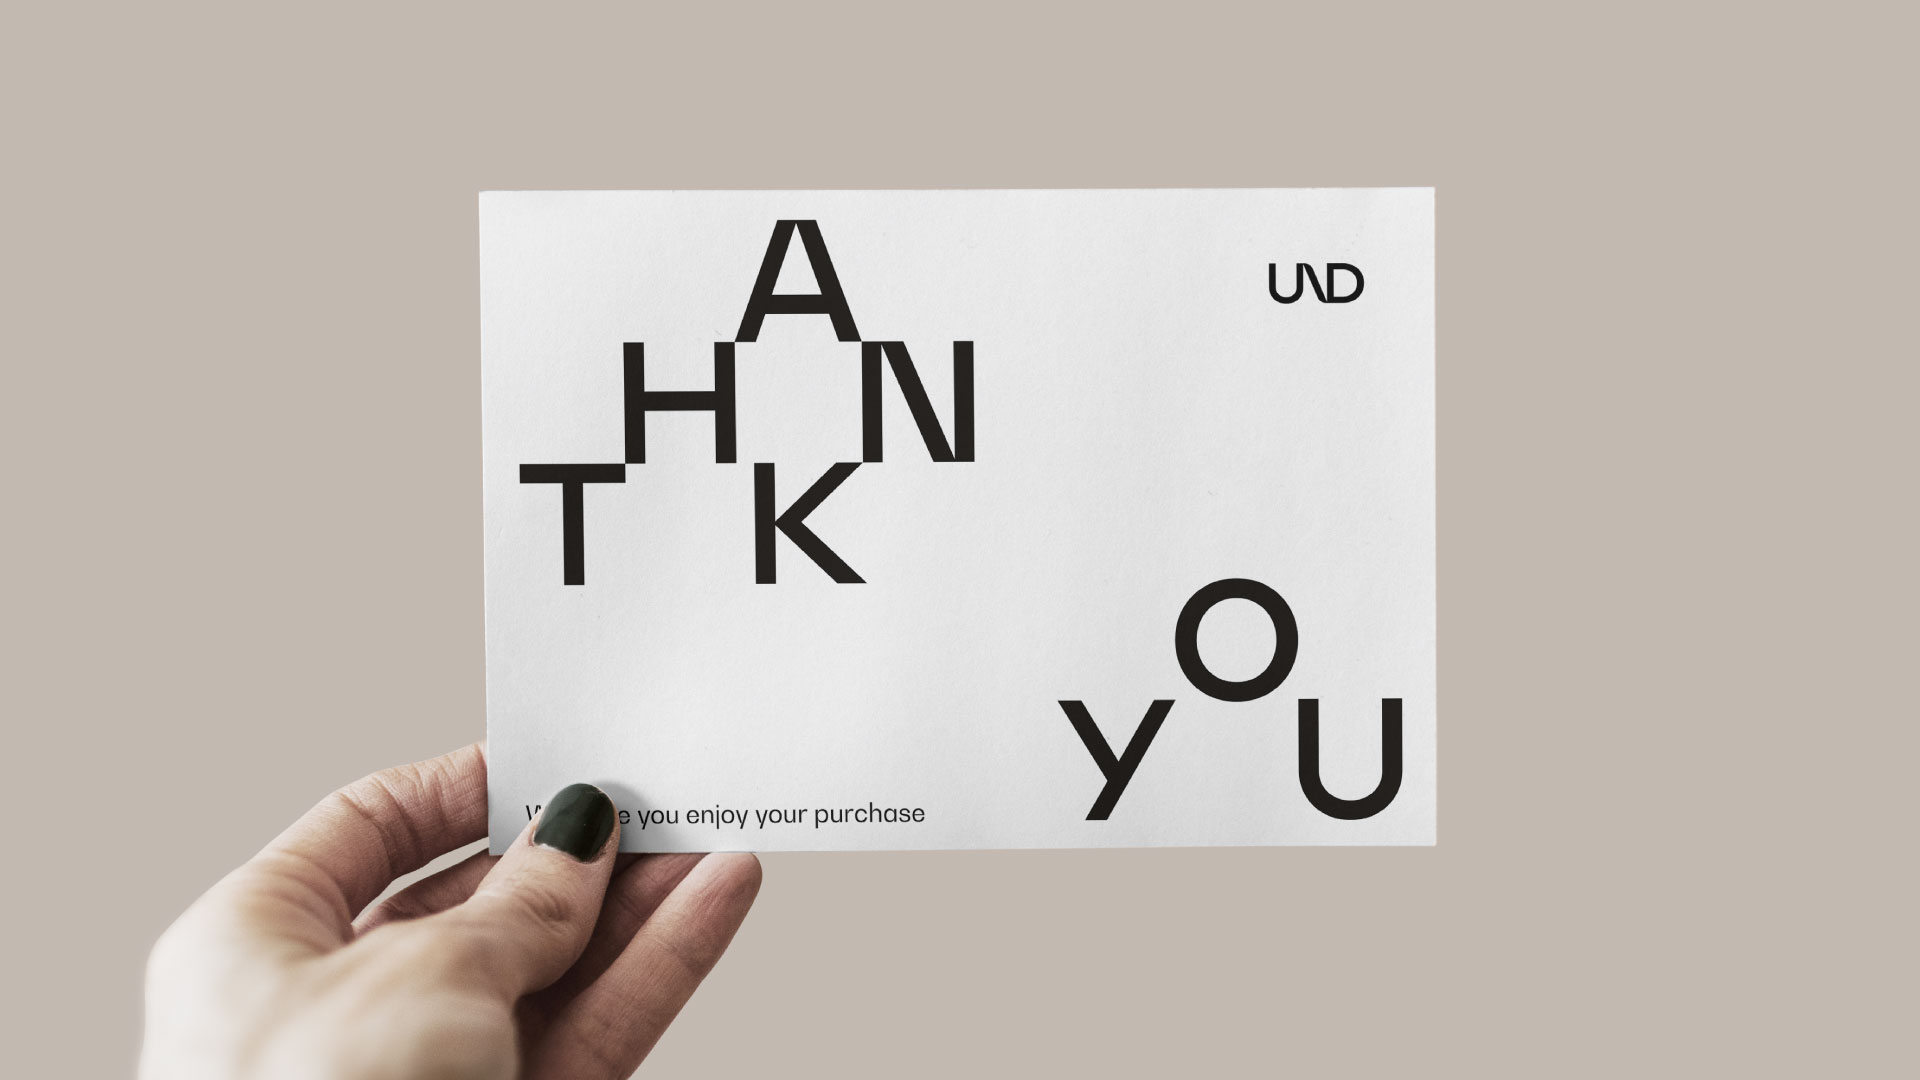 UND branded 'thank you' postcard that comes with every purchase.